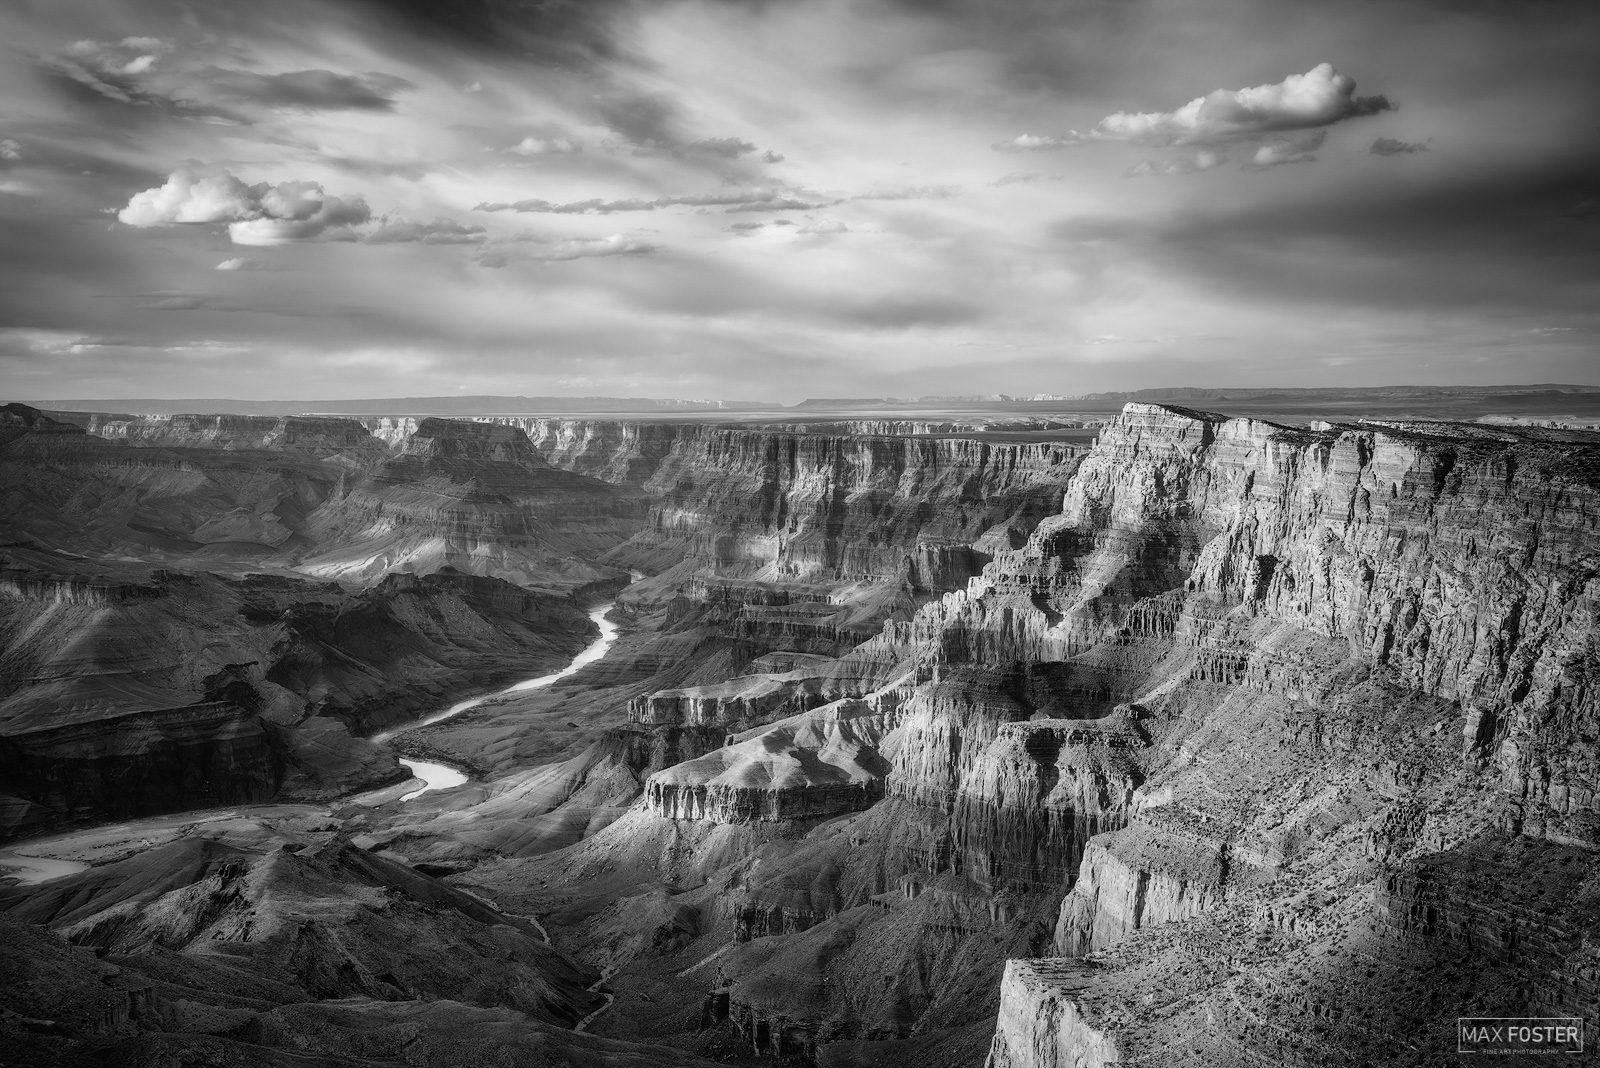 Bring nature into your home with Time & Chance, Max Foster's limited edition photography print of Desert View from his Black &...